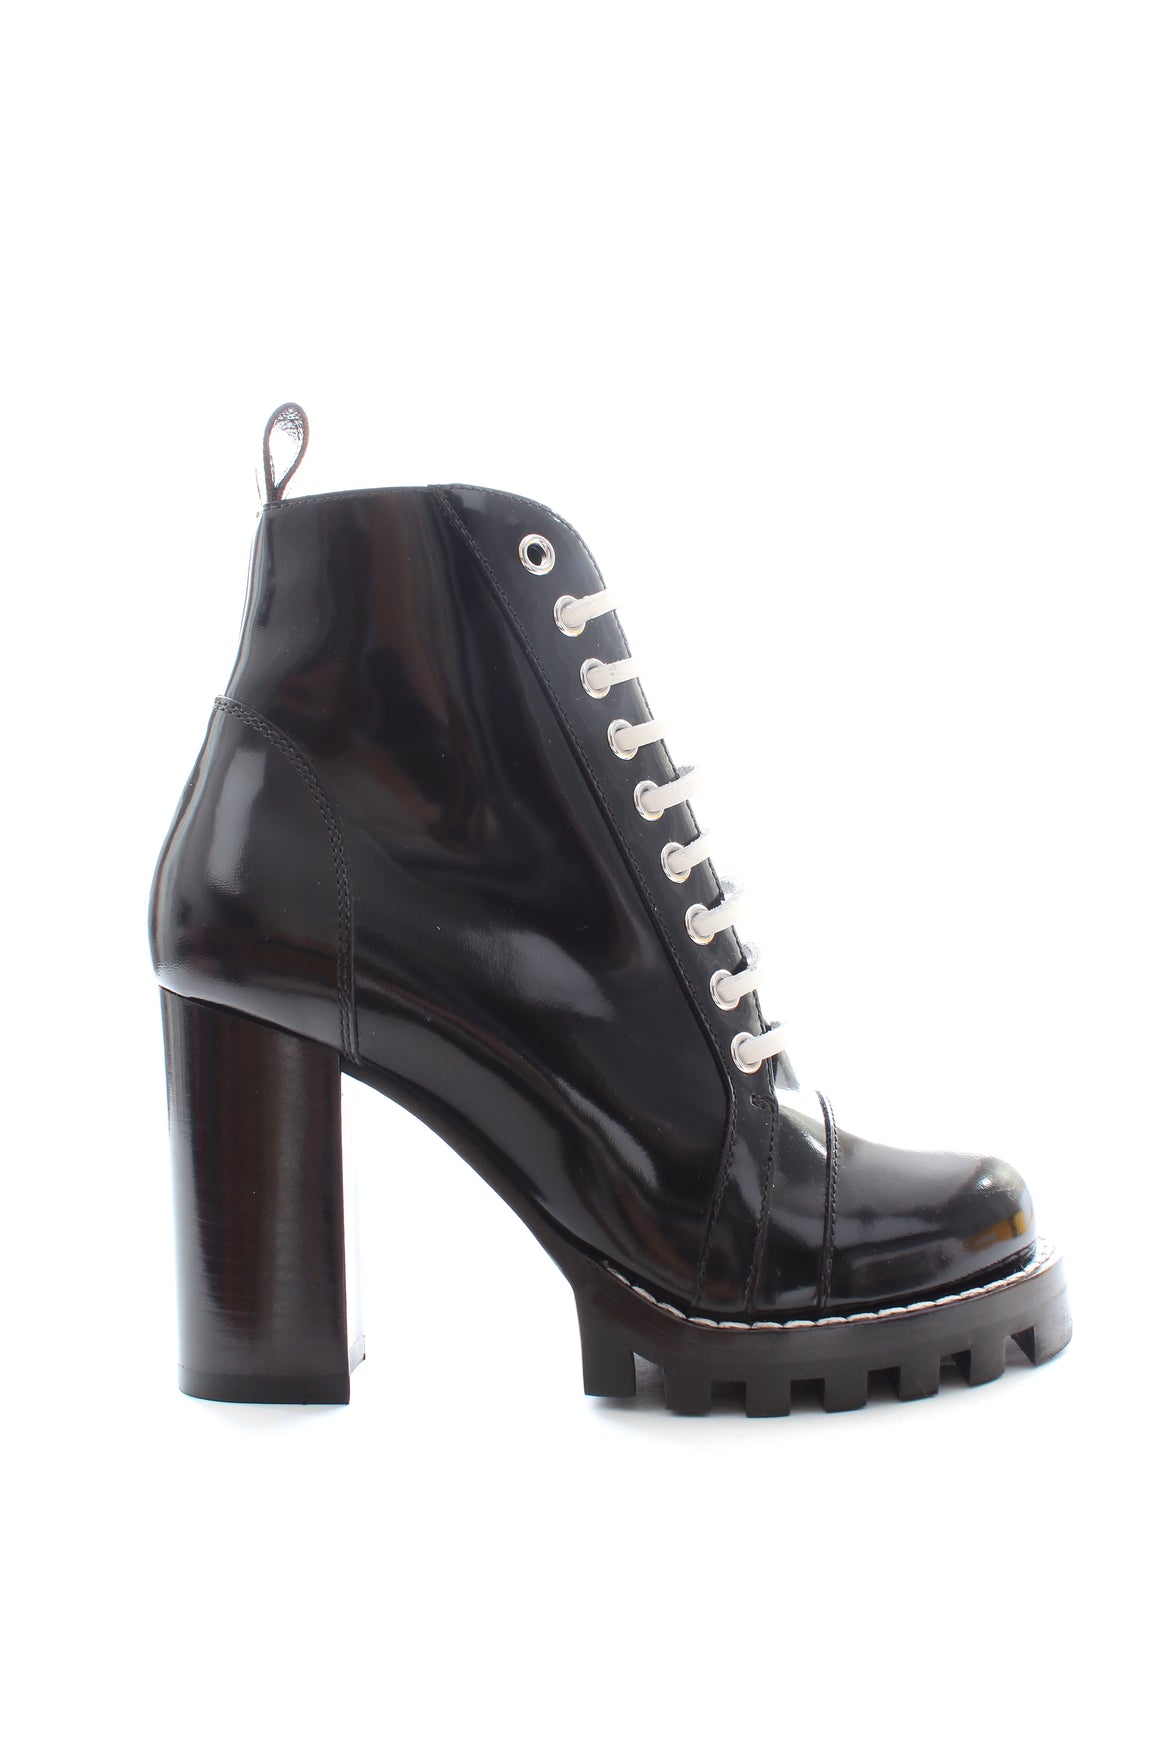 Louis Vuitton Patent Leather Star Trail Ankle Boots